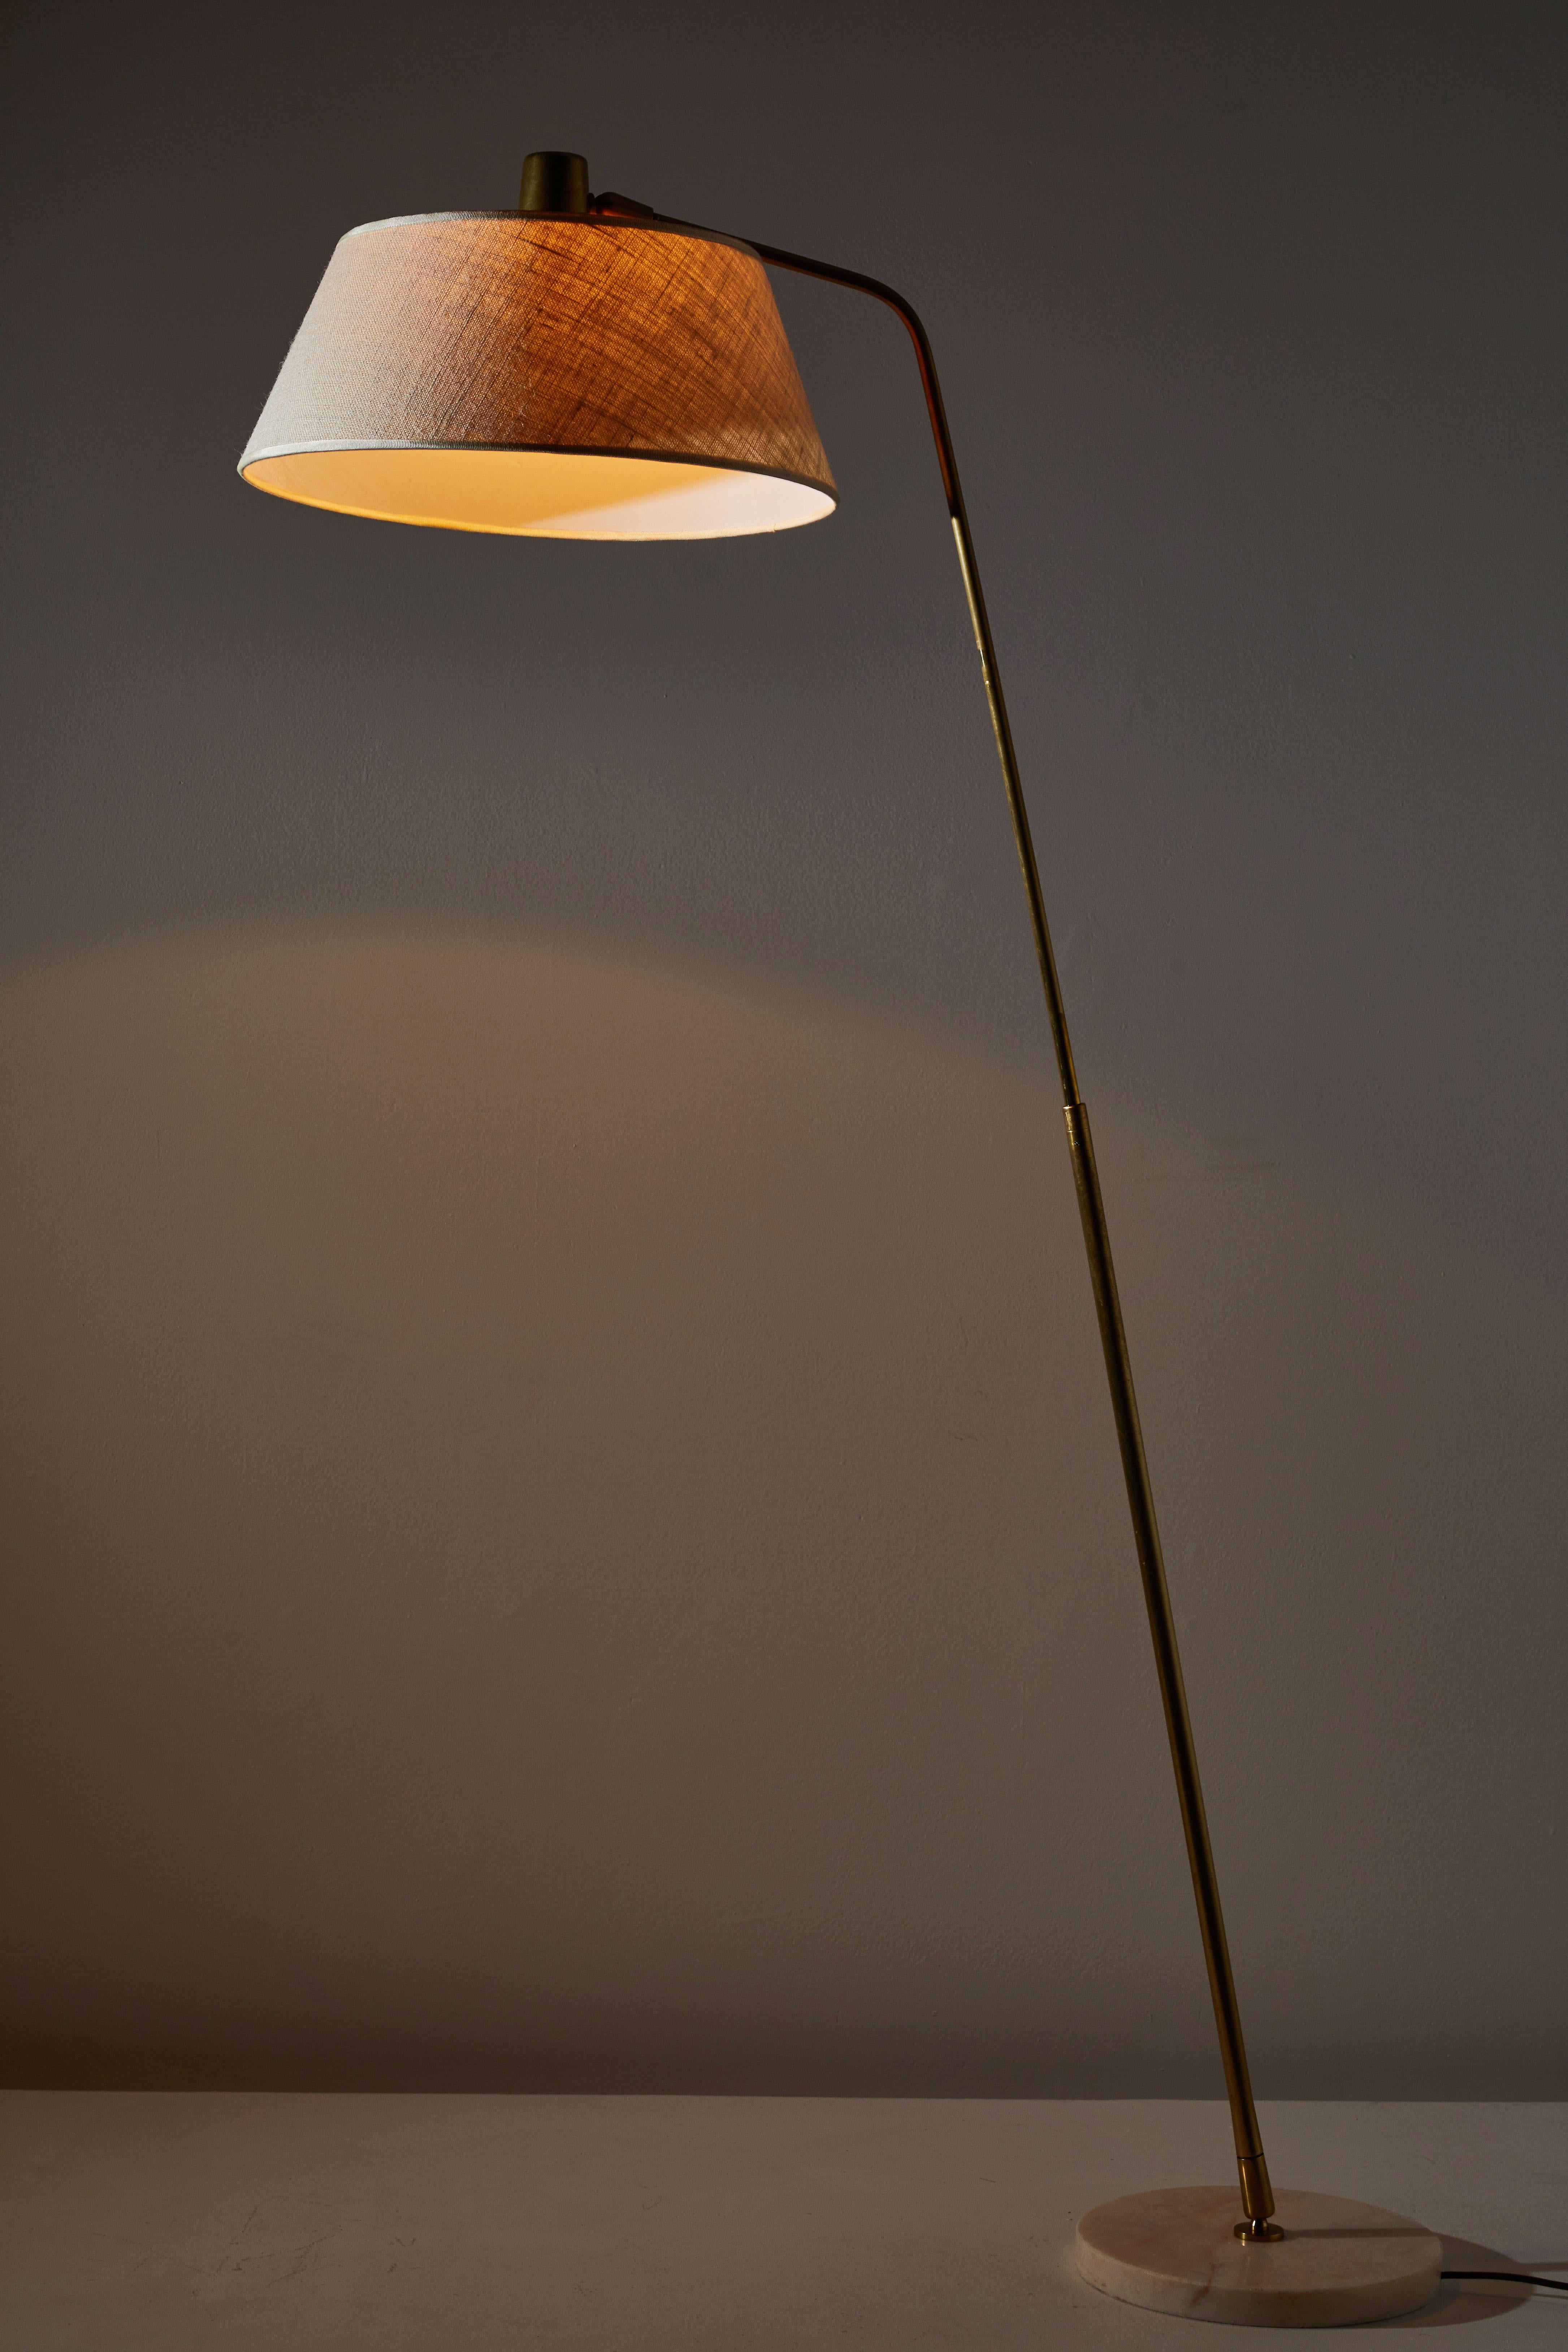 Floor lamp by Giuseppi Ostuni for Oluce. Designed and manufactured in Italy, circa 1950s. Brass, marble with custom linen shade. Stem adjust to various angles. Original cord with step switch. Takes on E27 75W maximum bulb.